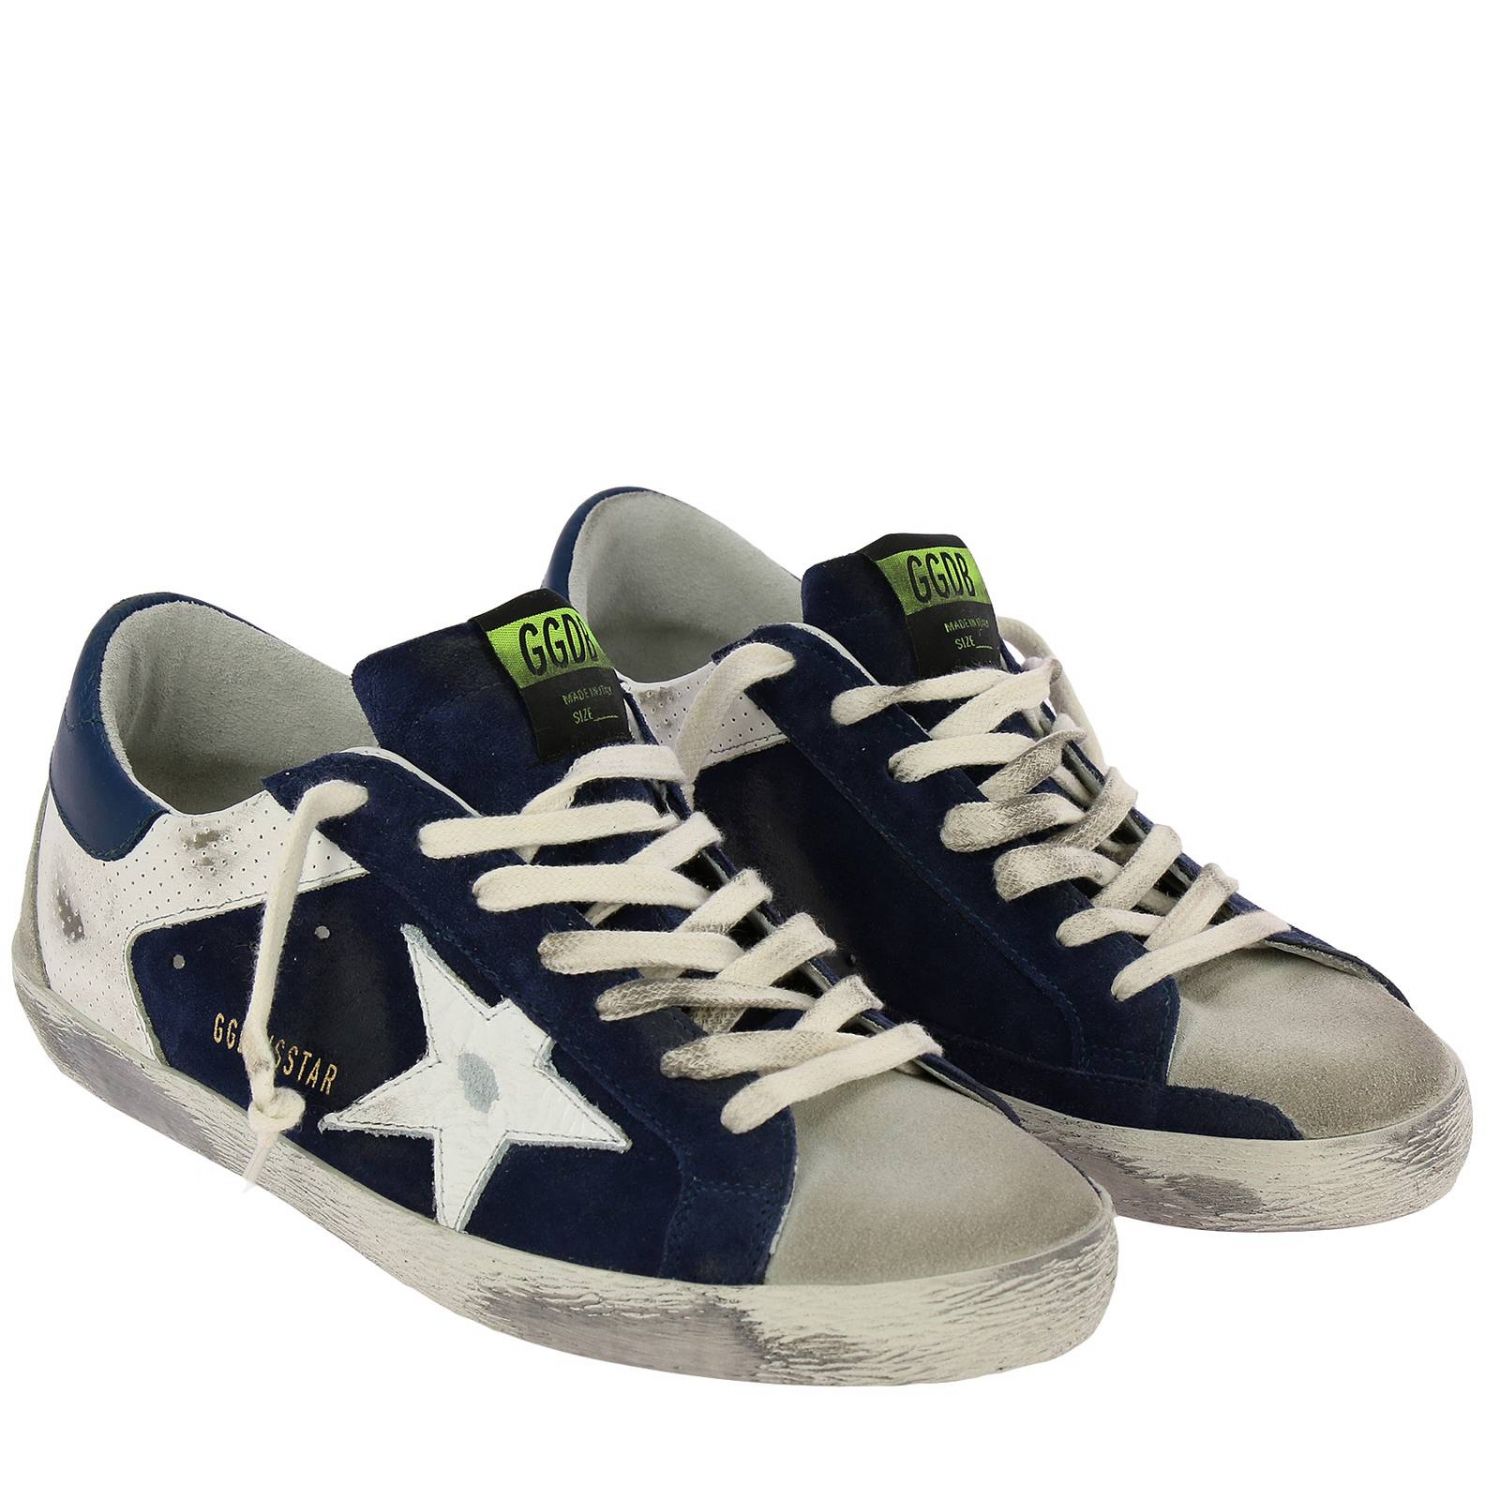 Golden Goose Outlet: sneakers for man - Blue | Golden Goose sneakers ...